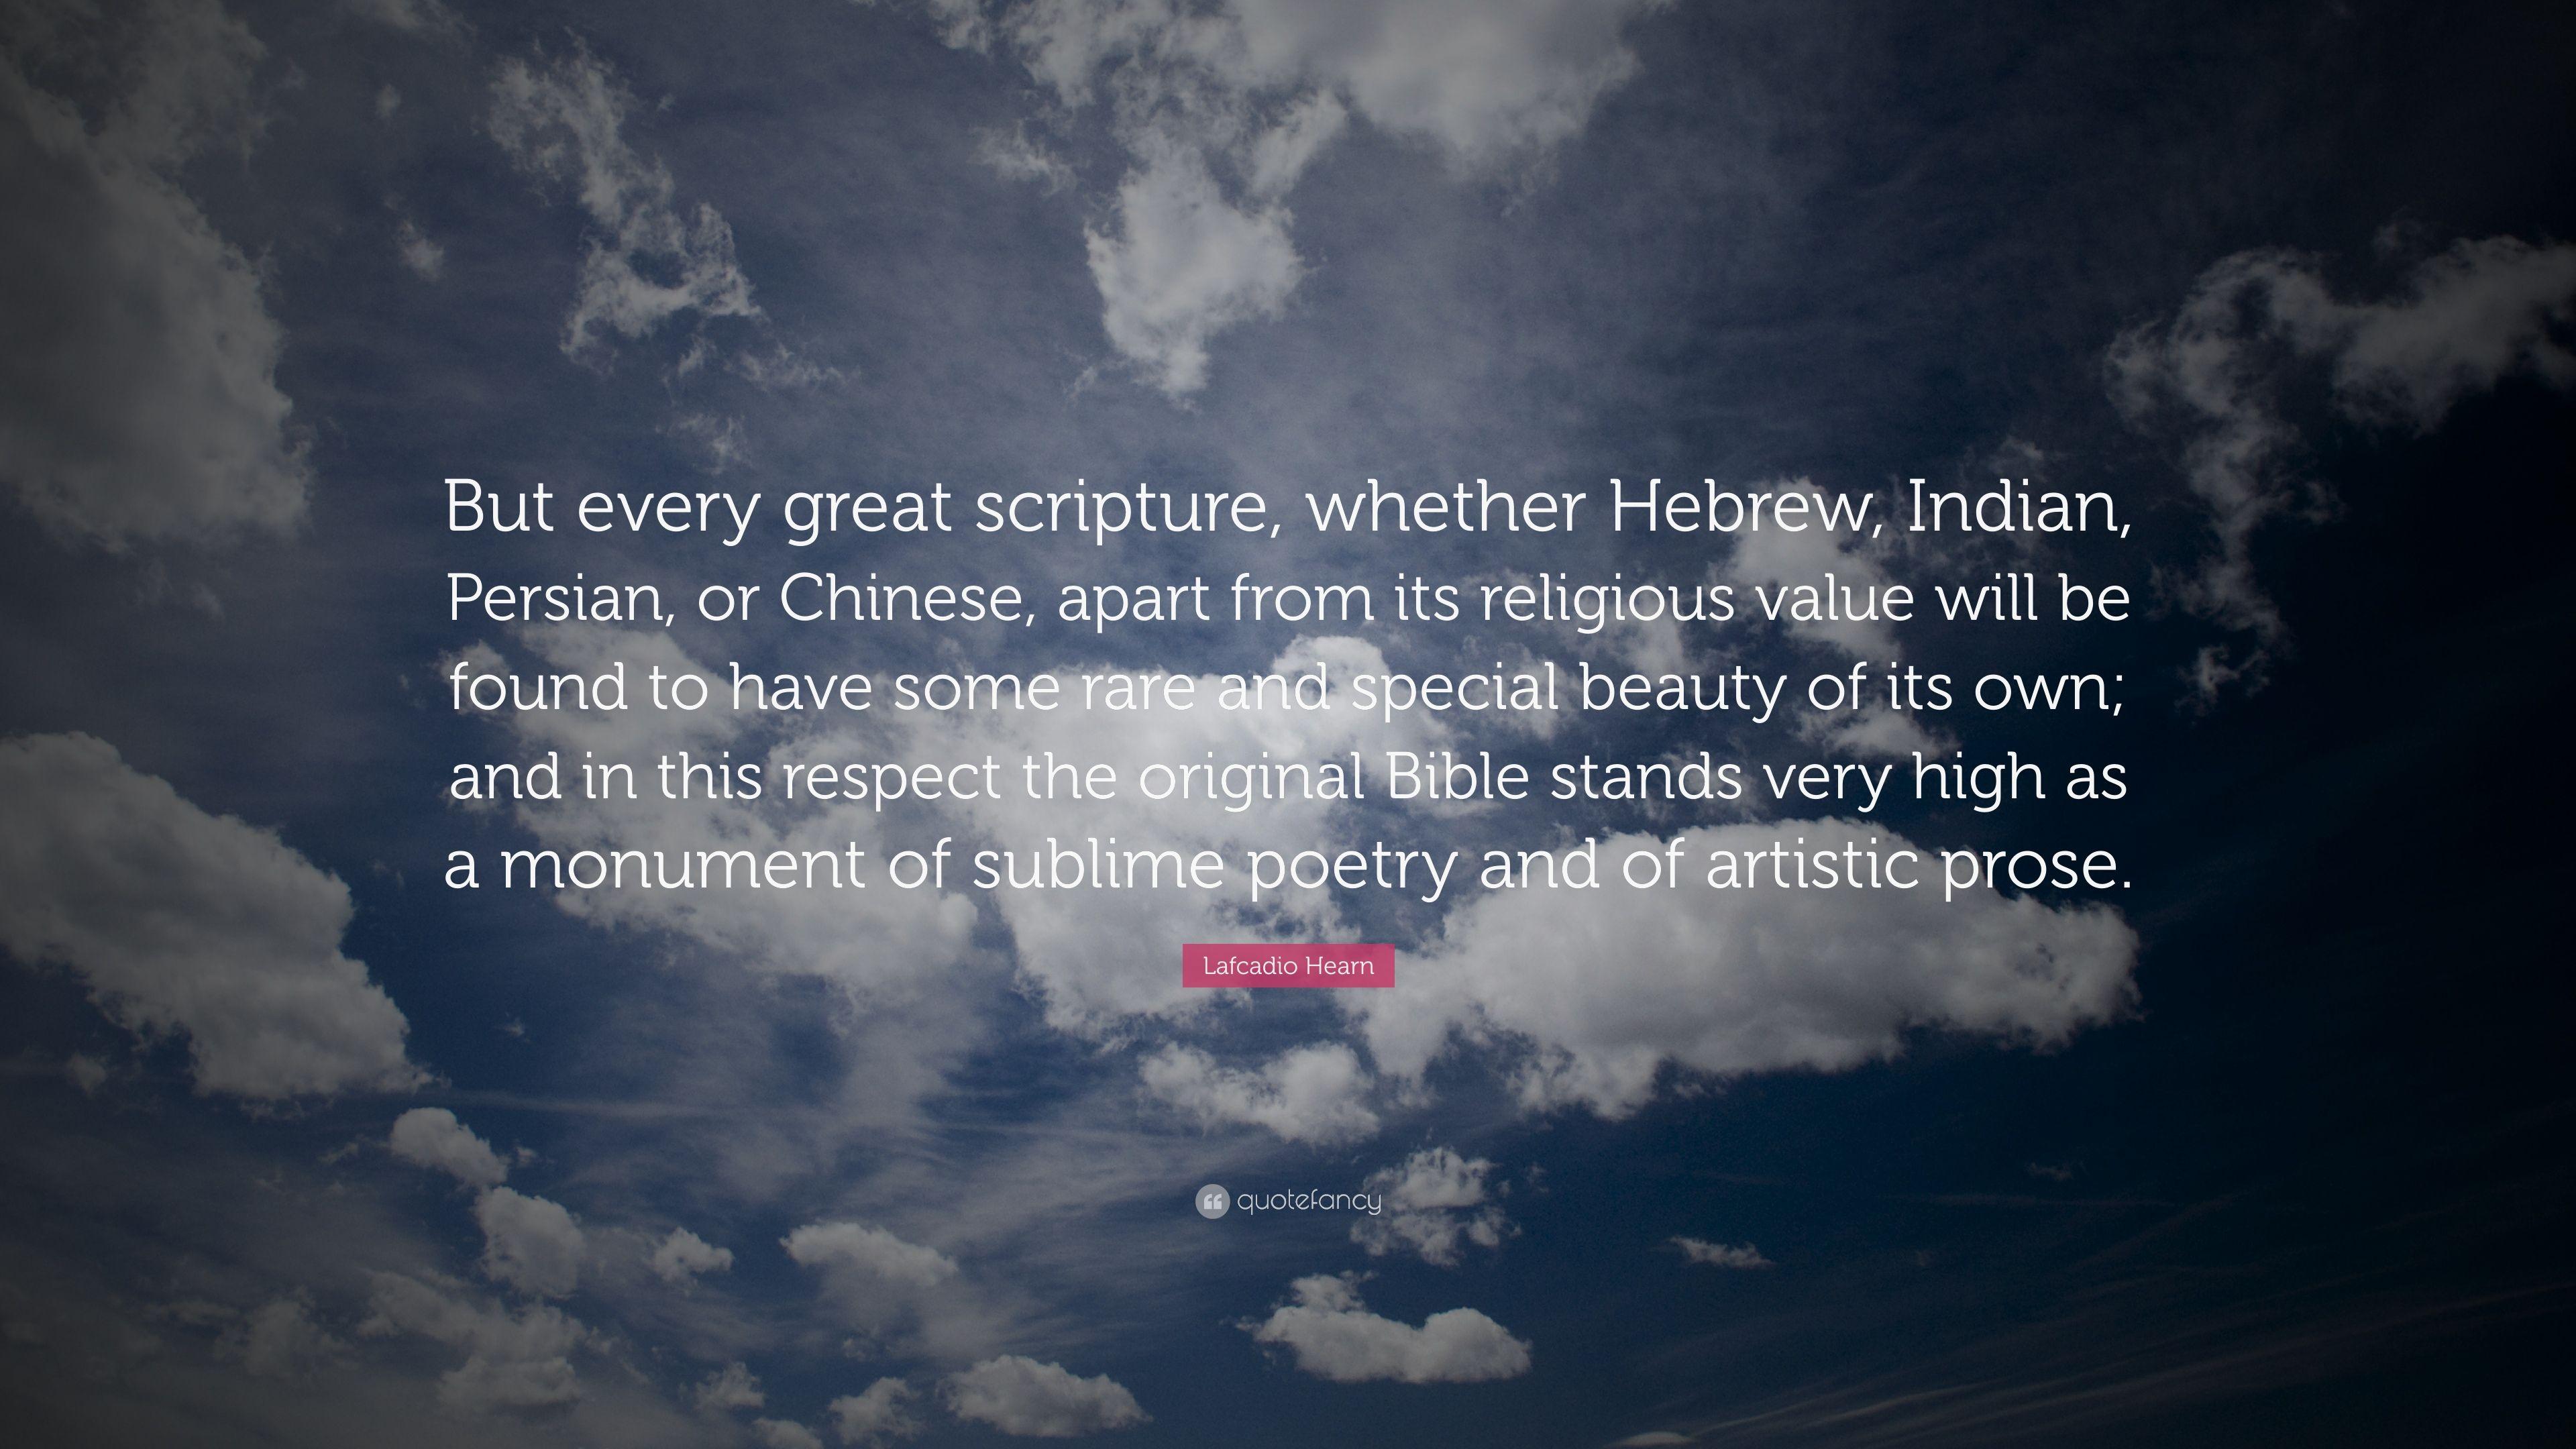 Lafcadio Hearn Quote: “But every great scripture, whether Hebrew